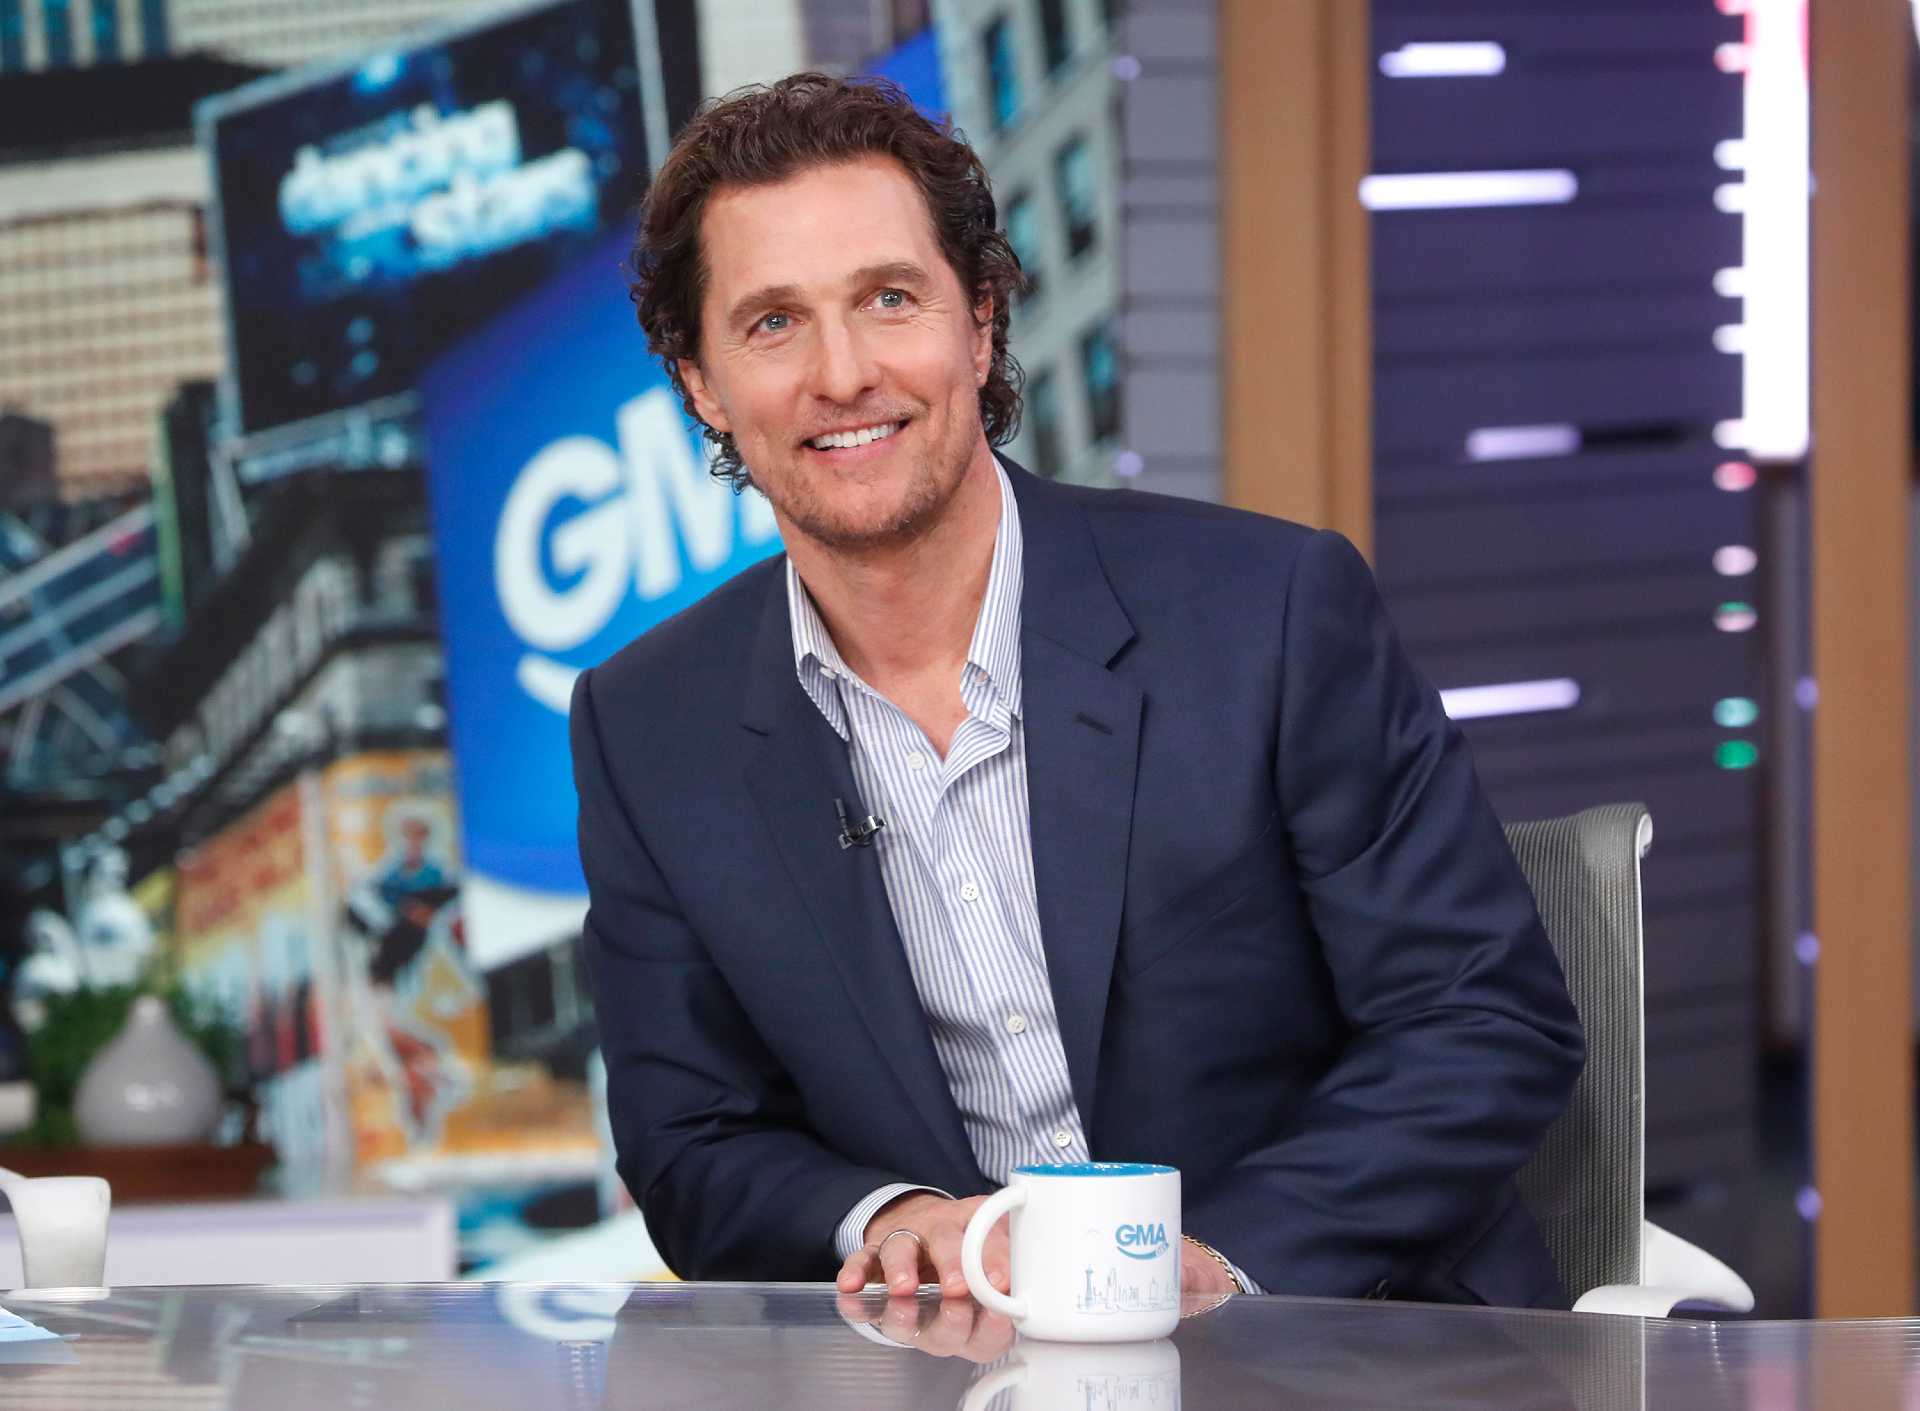 Matthew McConaughey in a dark blazer at a table with a cup